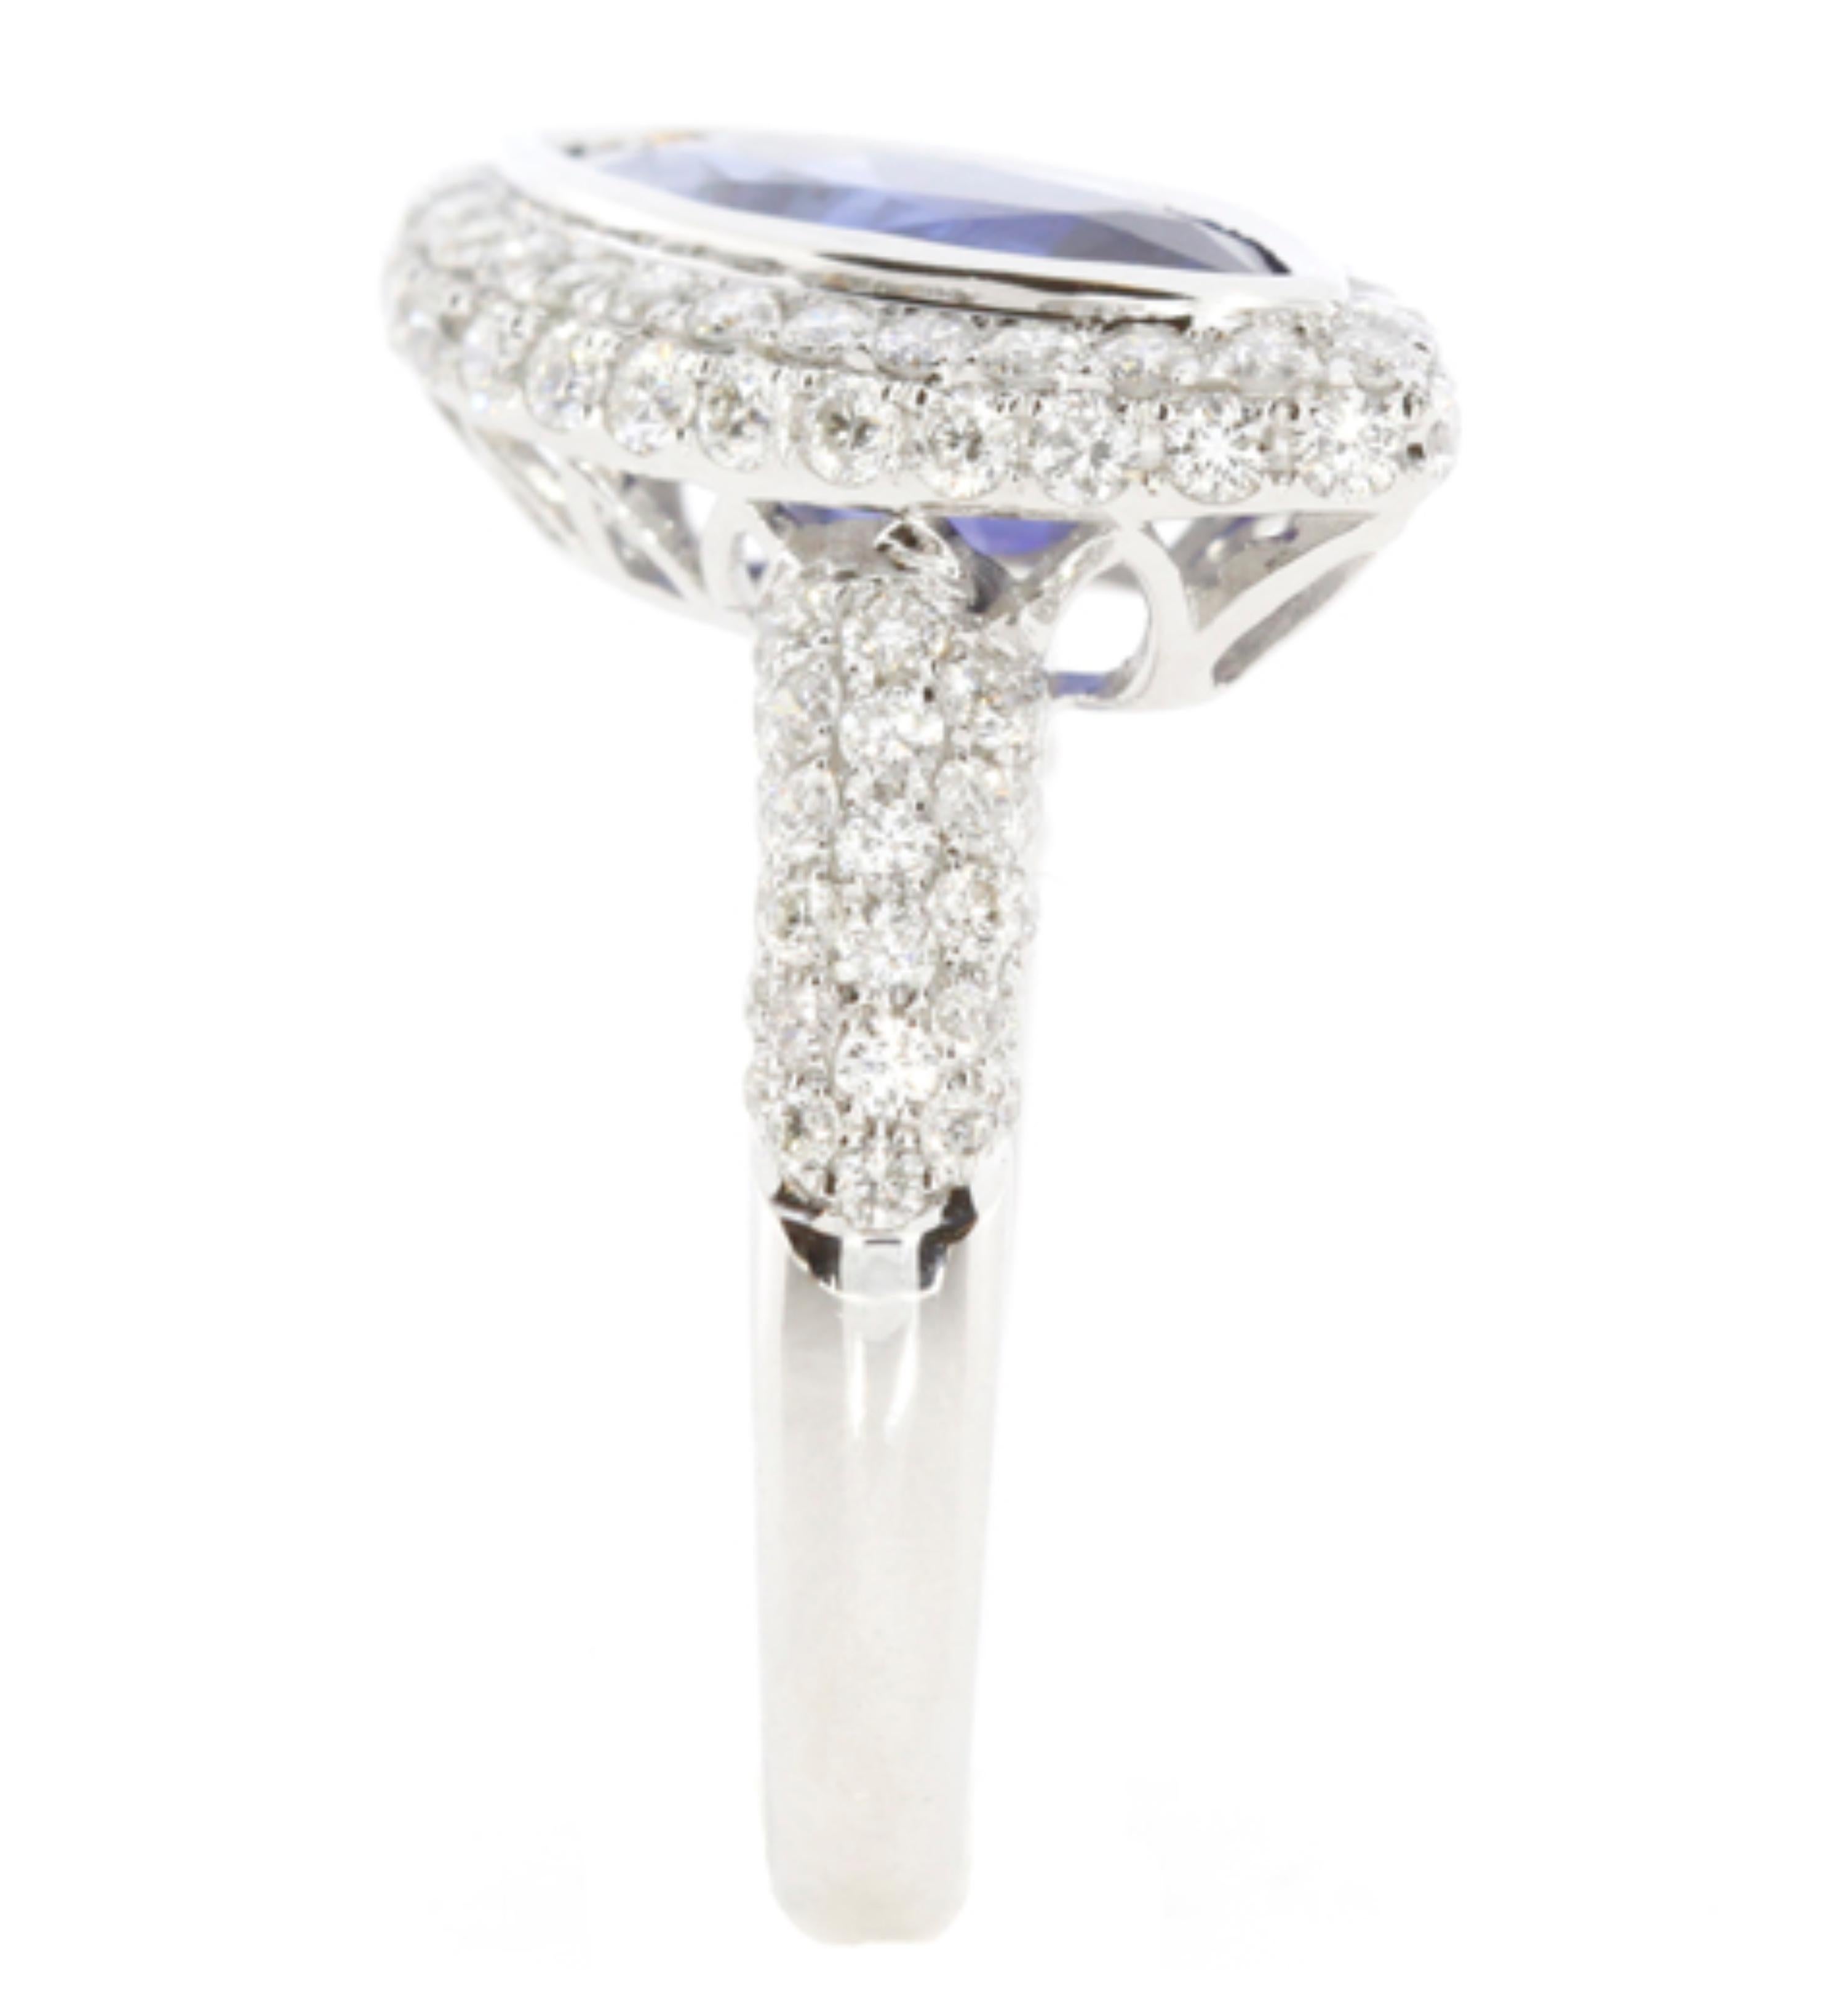 3.5 carat ring centered by a  blue marquise sapphire weighing 2.36 carats. This ring made by Shimon's Creations features 1.14 Carat of shimmering white diamonds and 18k white gold.

Color Stone And Diamond Breakdown:
White Diamonds: 1.14 carats